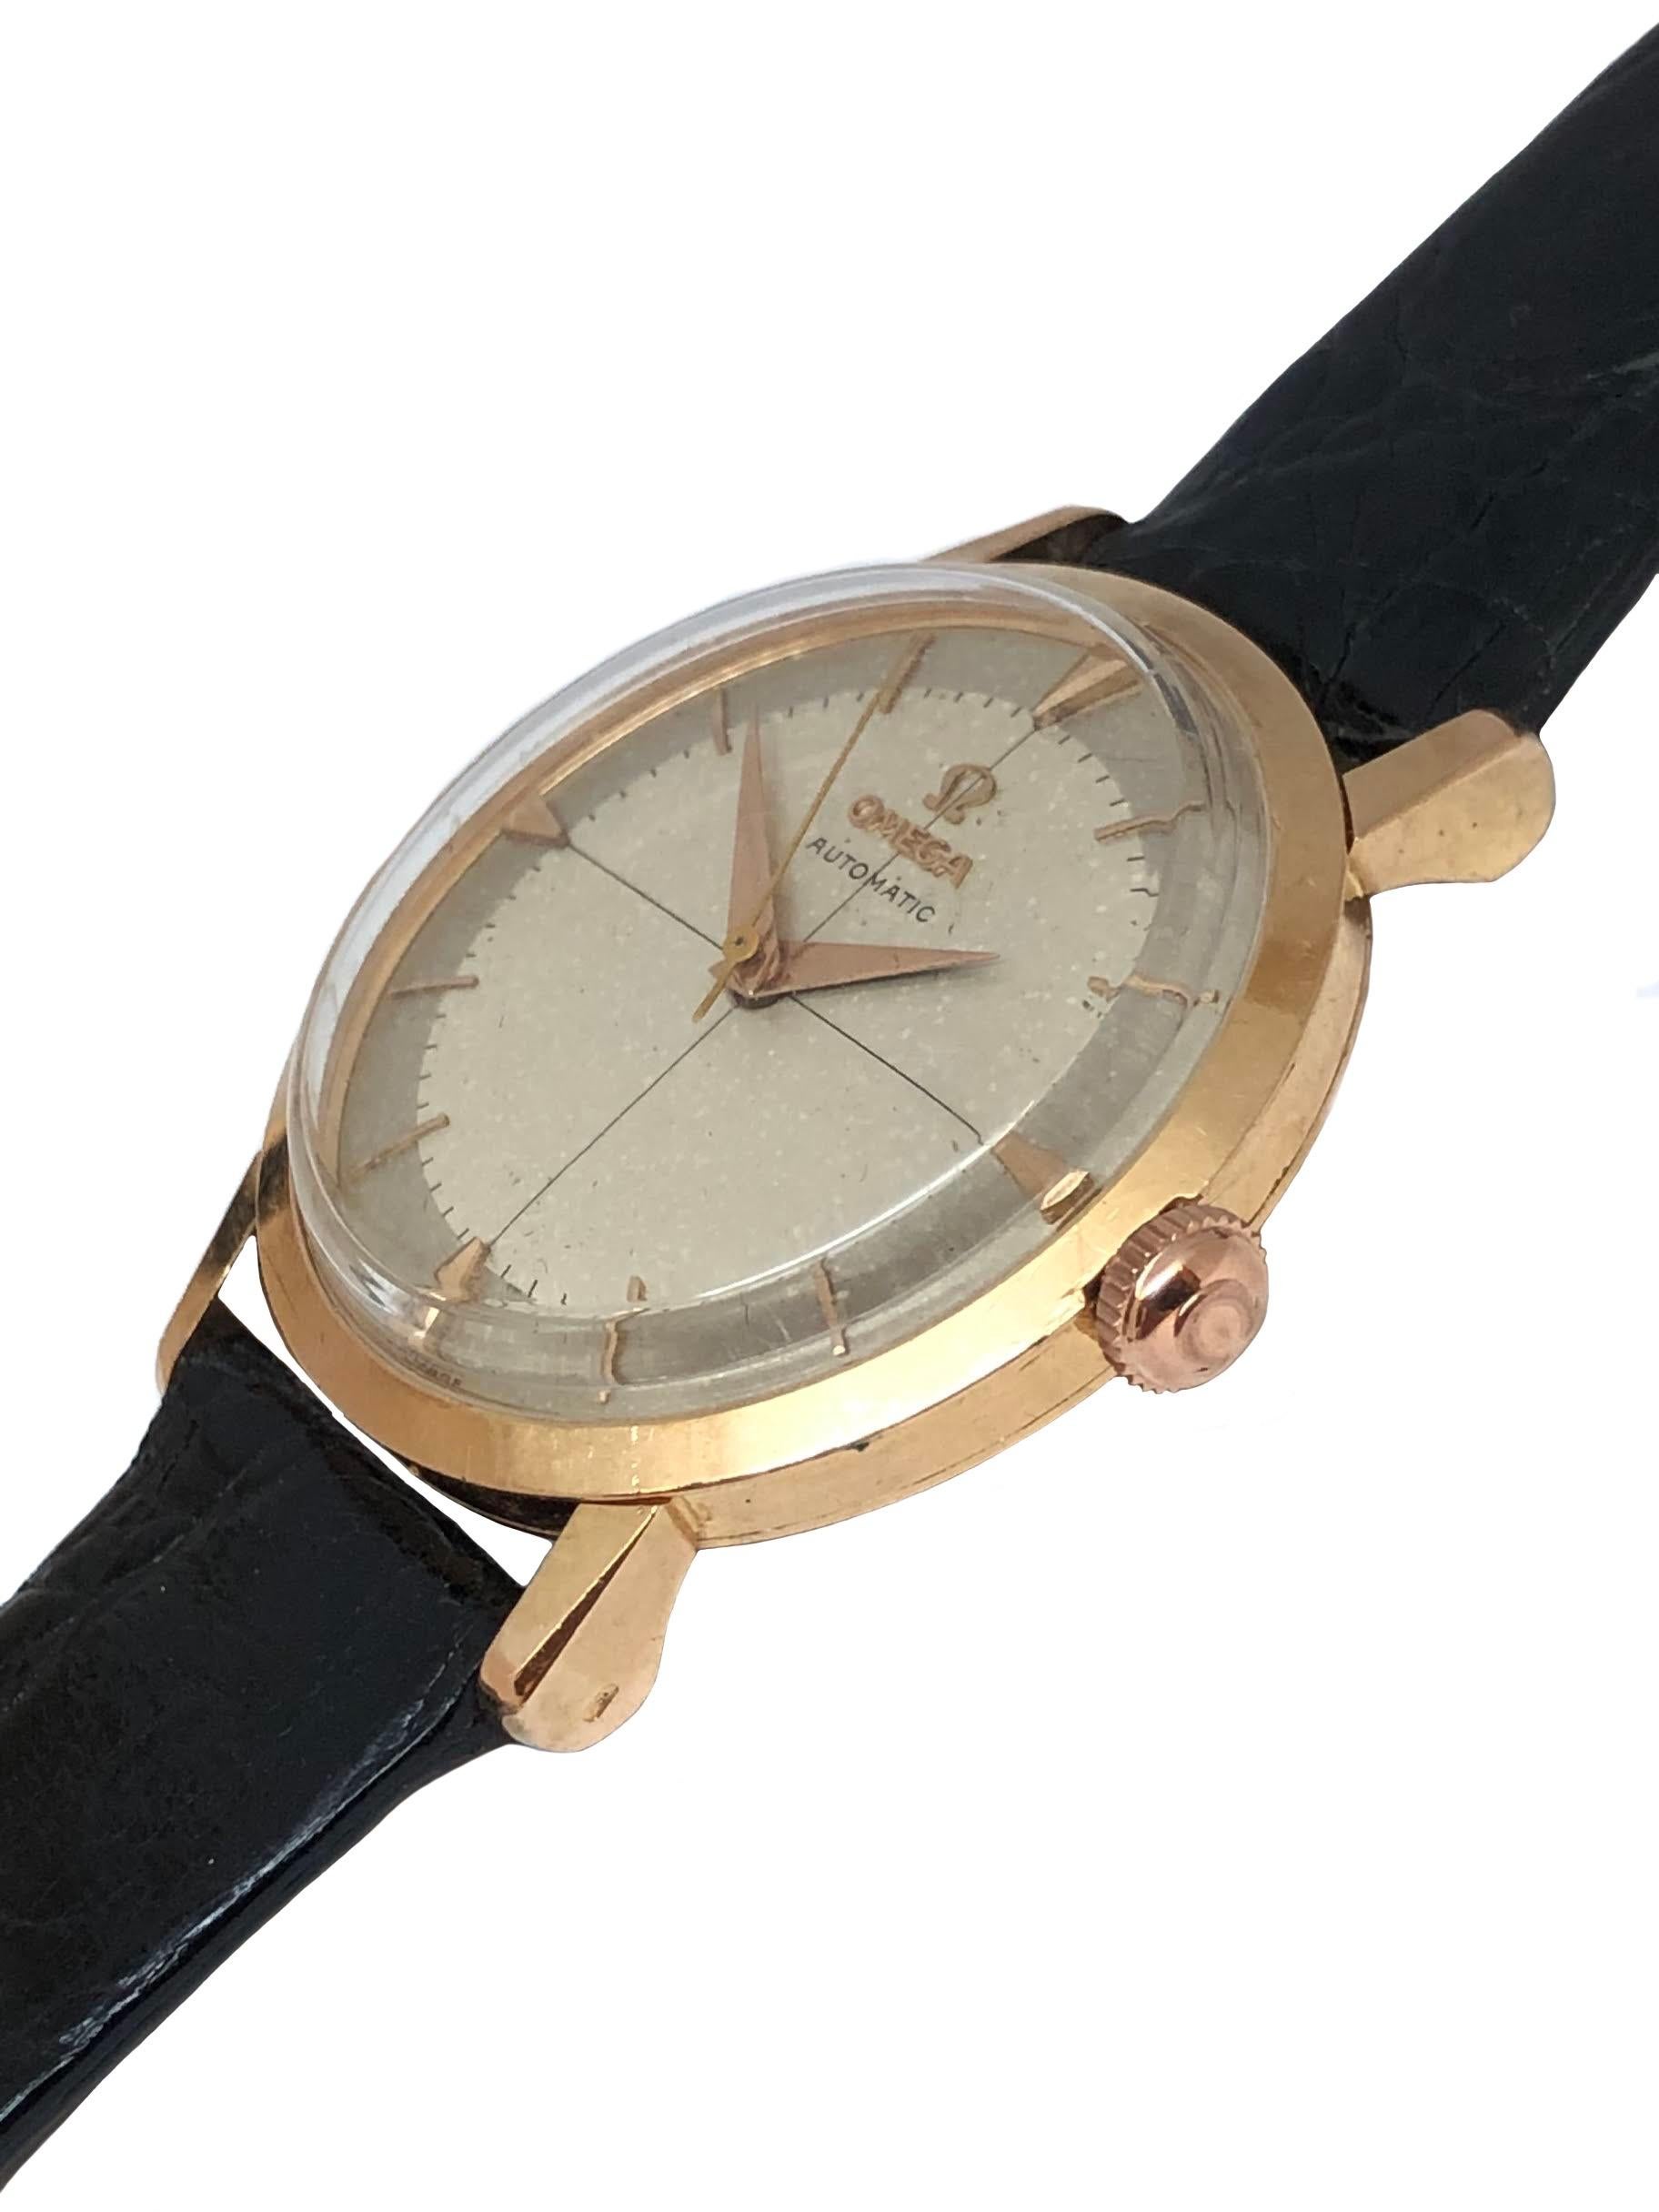 Circa 1950s Omega Wrist Watch, 34 M.M. 18K Rose Gold 3 Piece Case with slight Tear drop lugs. Caliber 501, 17 Jewel Automatic Self Winding Movement. Original, Excellent Silver Satin Dial with Raised Rose Gold markers and Rose Gold Hands and a Sweep